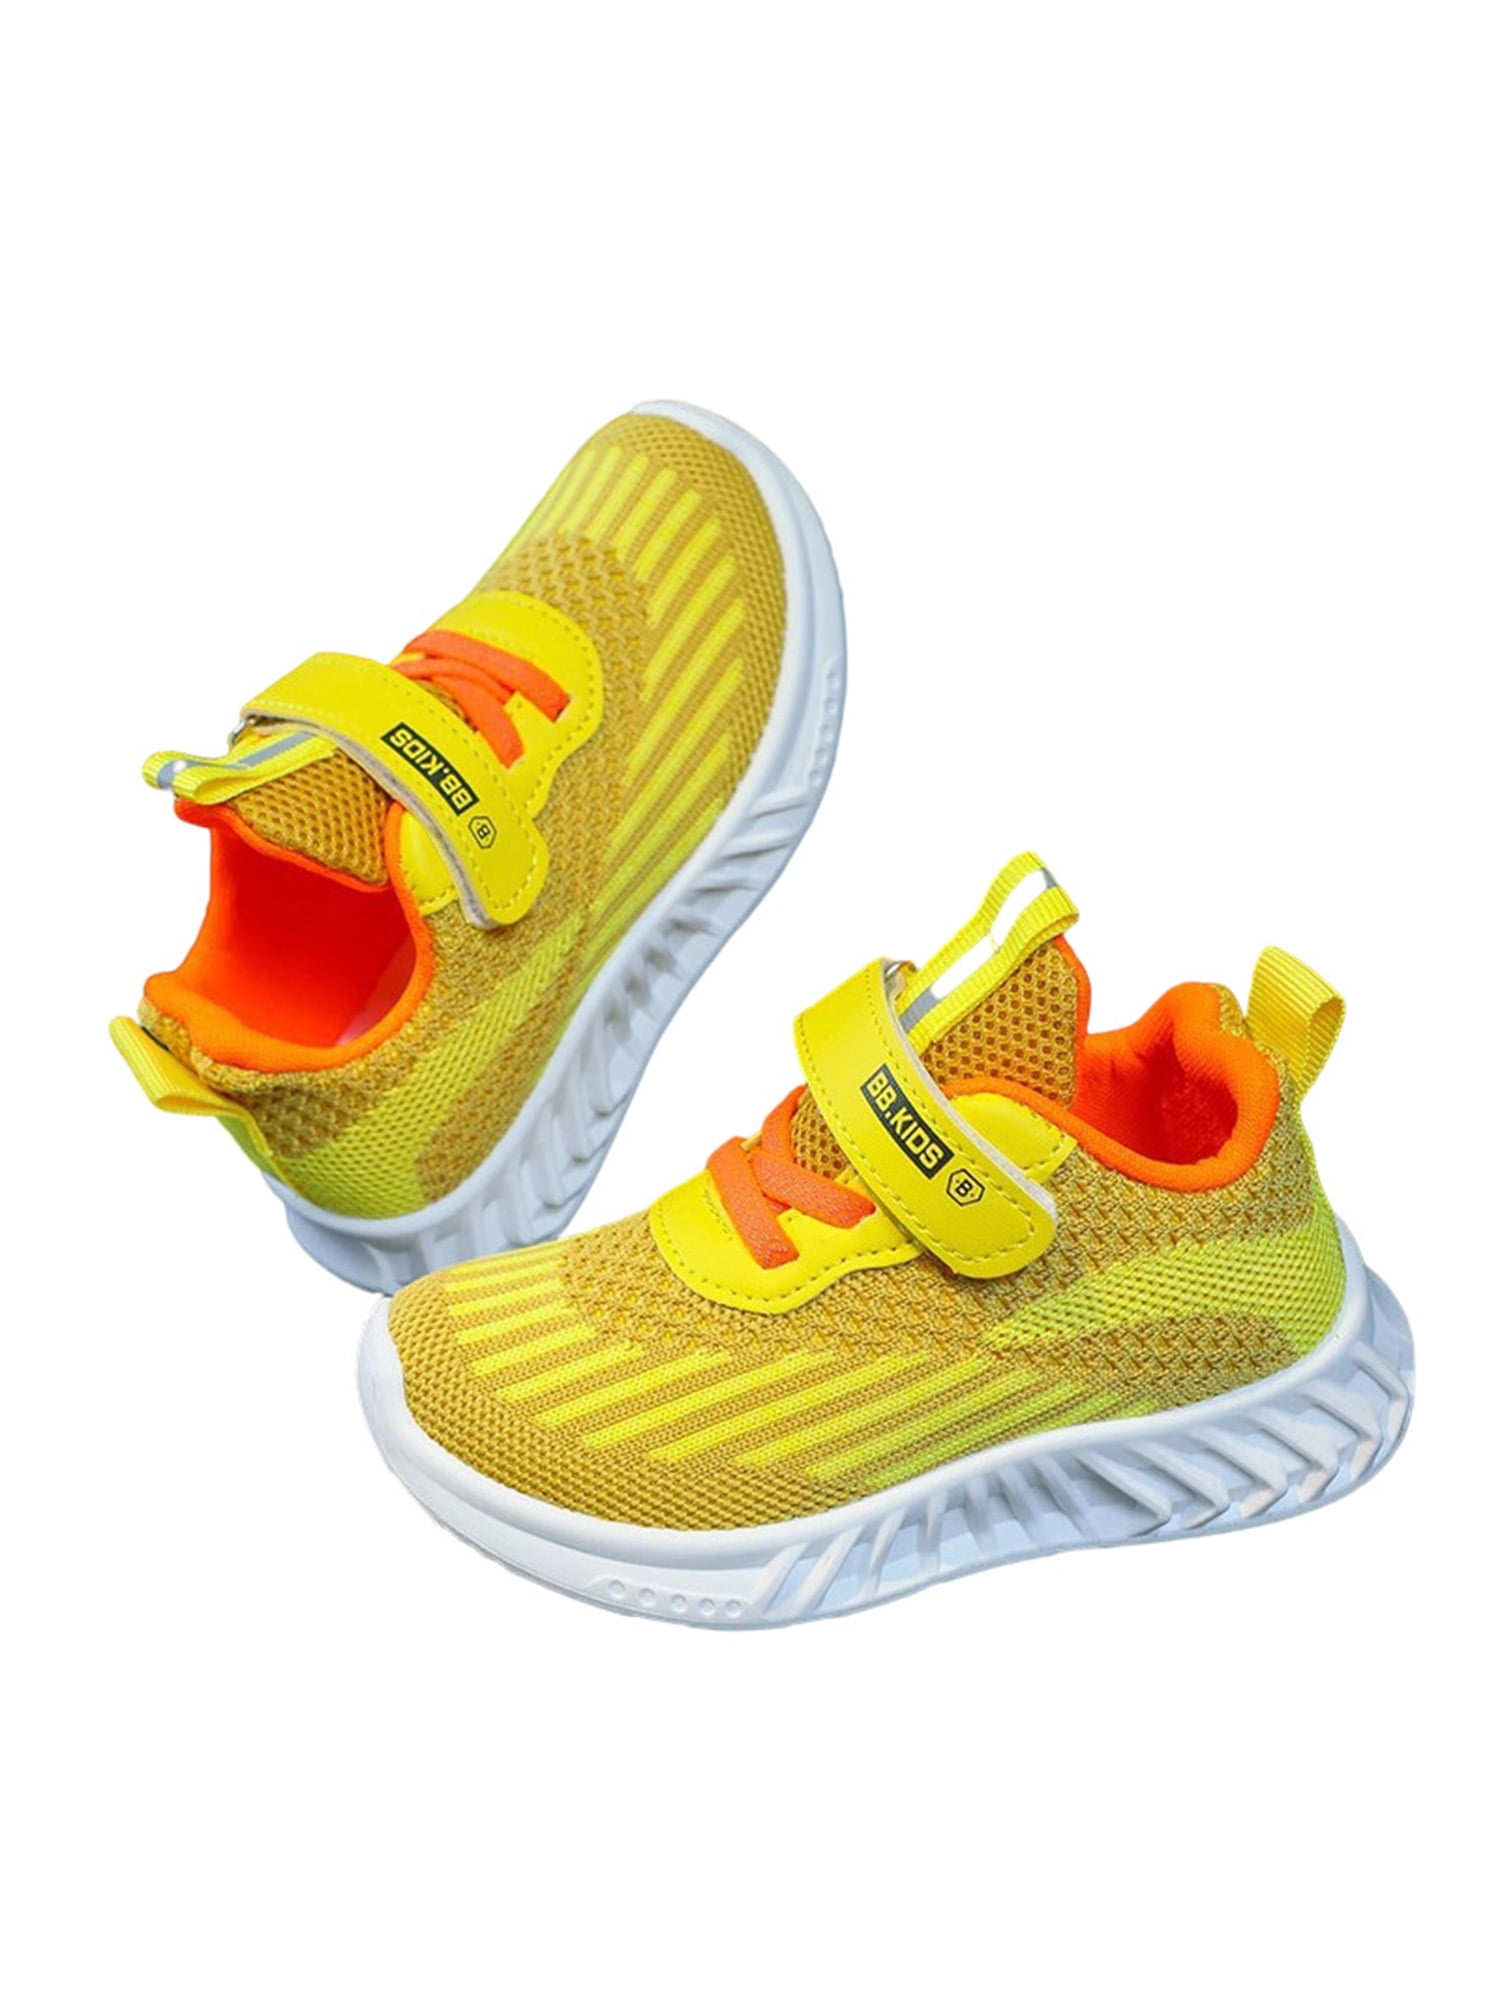 Sweeting Casual Breathable Lace-up Running Shoes Little Kid/Big Kid 